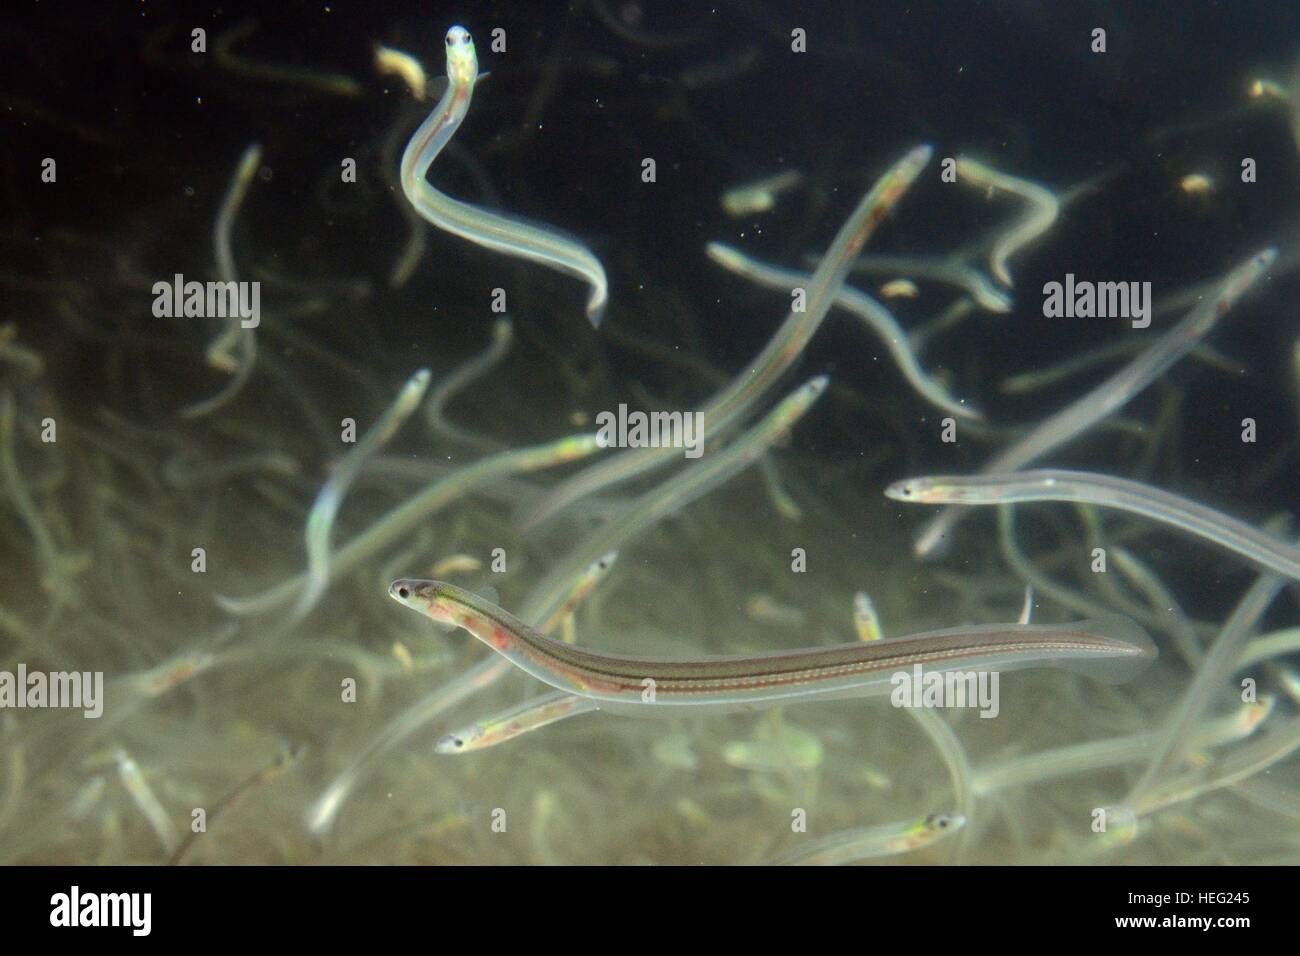 Young European eel (Anguilla anguilla) elvers, or glass eels for reintroductions swimming in a large holding tank, Gloucester UK Stock Photo